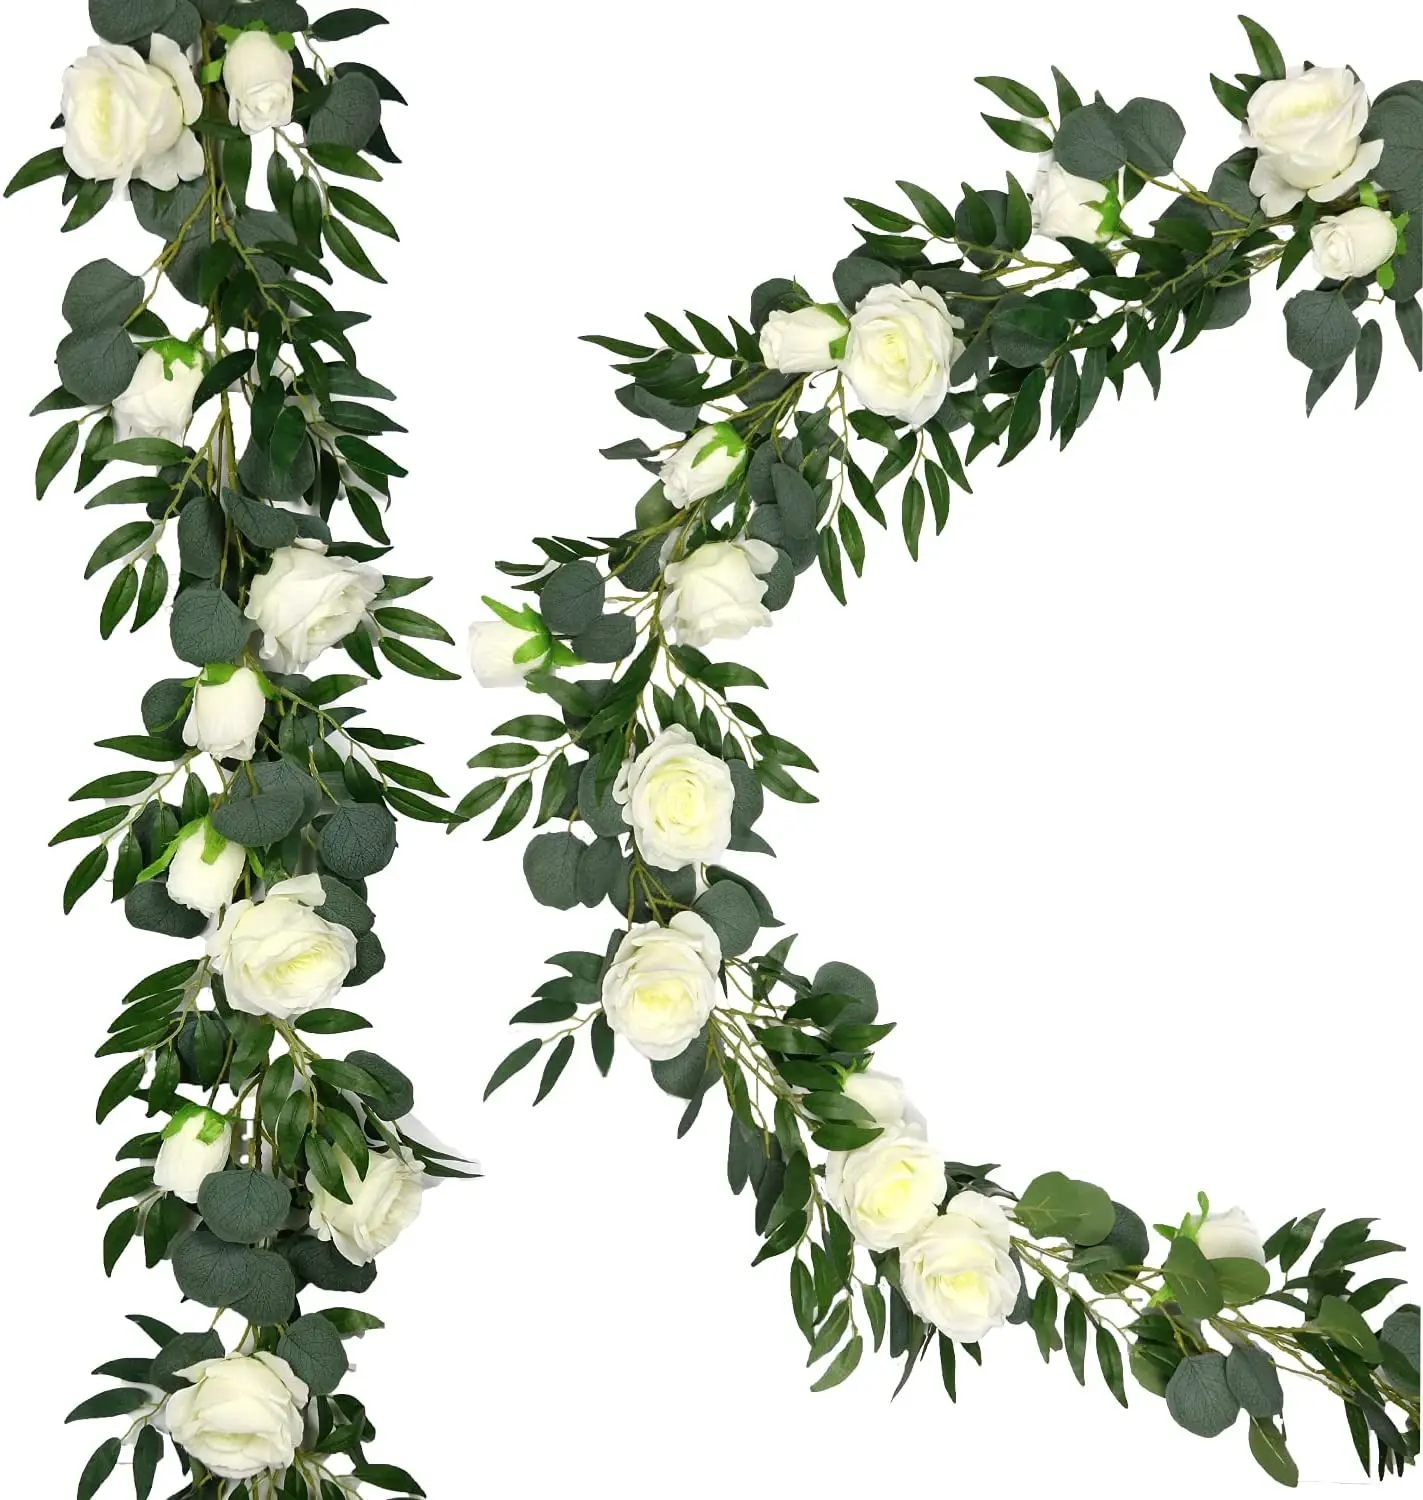 2 Packs Artificial Eucalyptus Garland,Faux Silk Eucalyptus Garland with White Roses Willow Vines Twigs Leaves,Greenery Garland